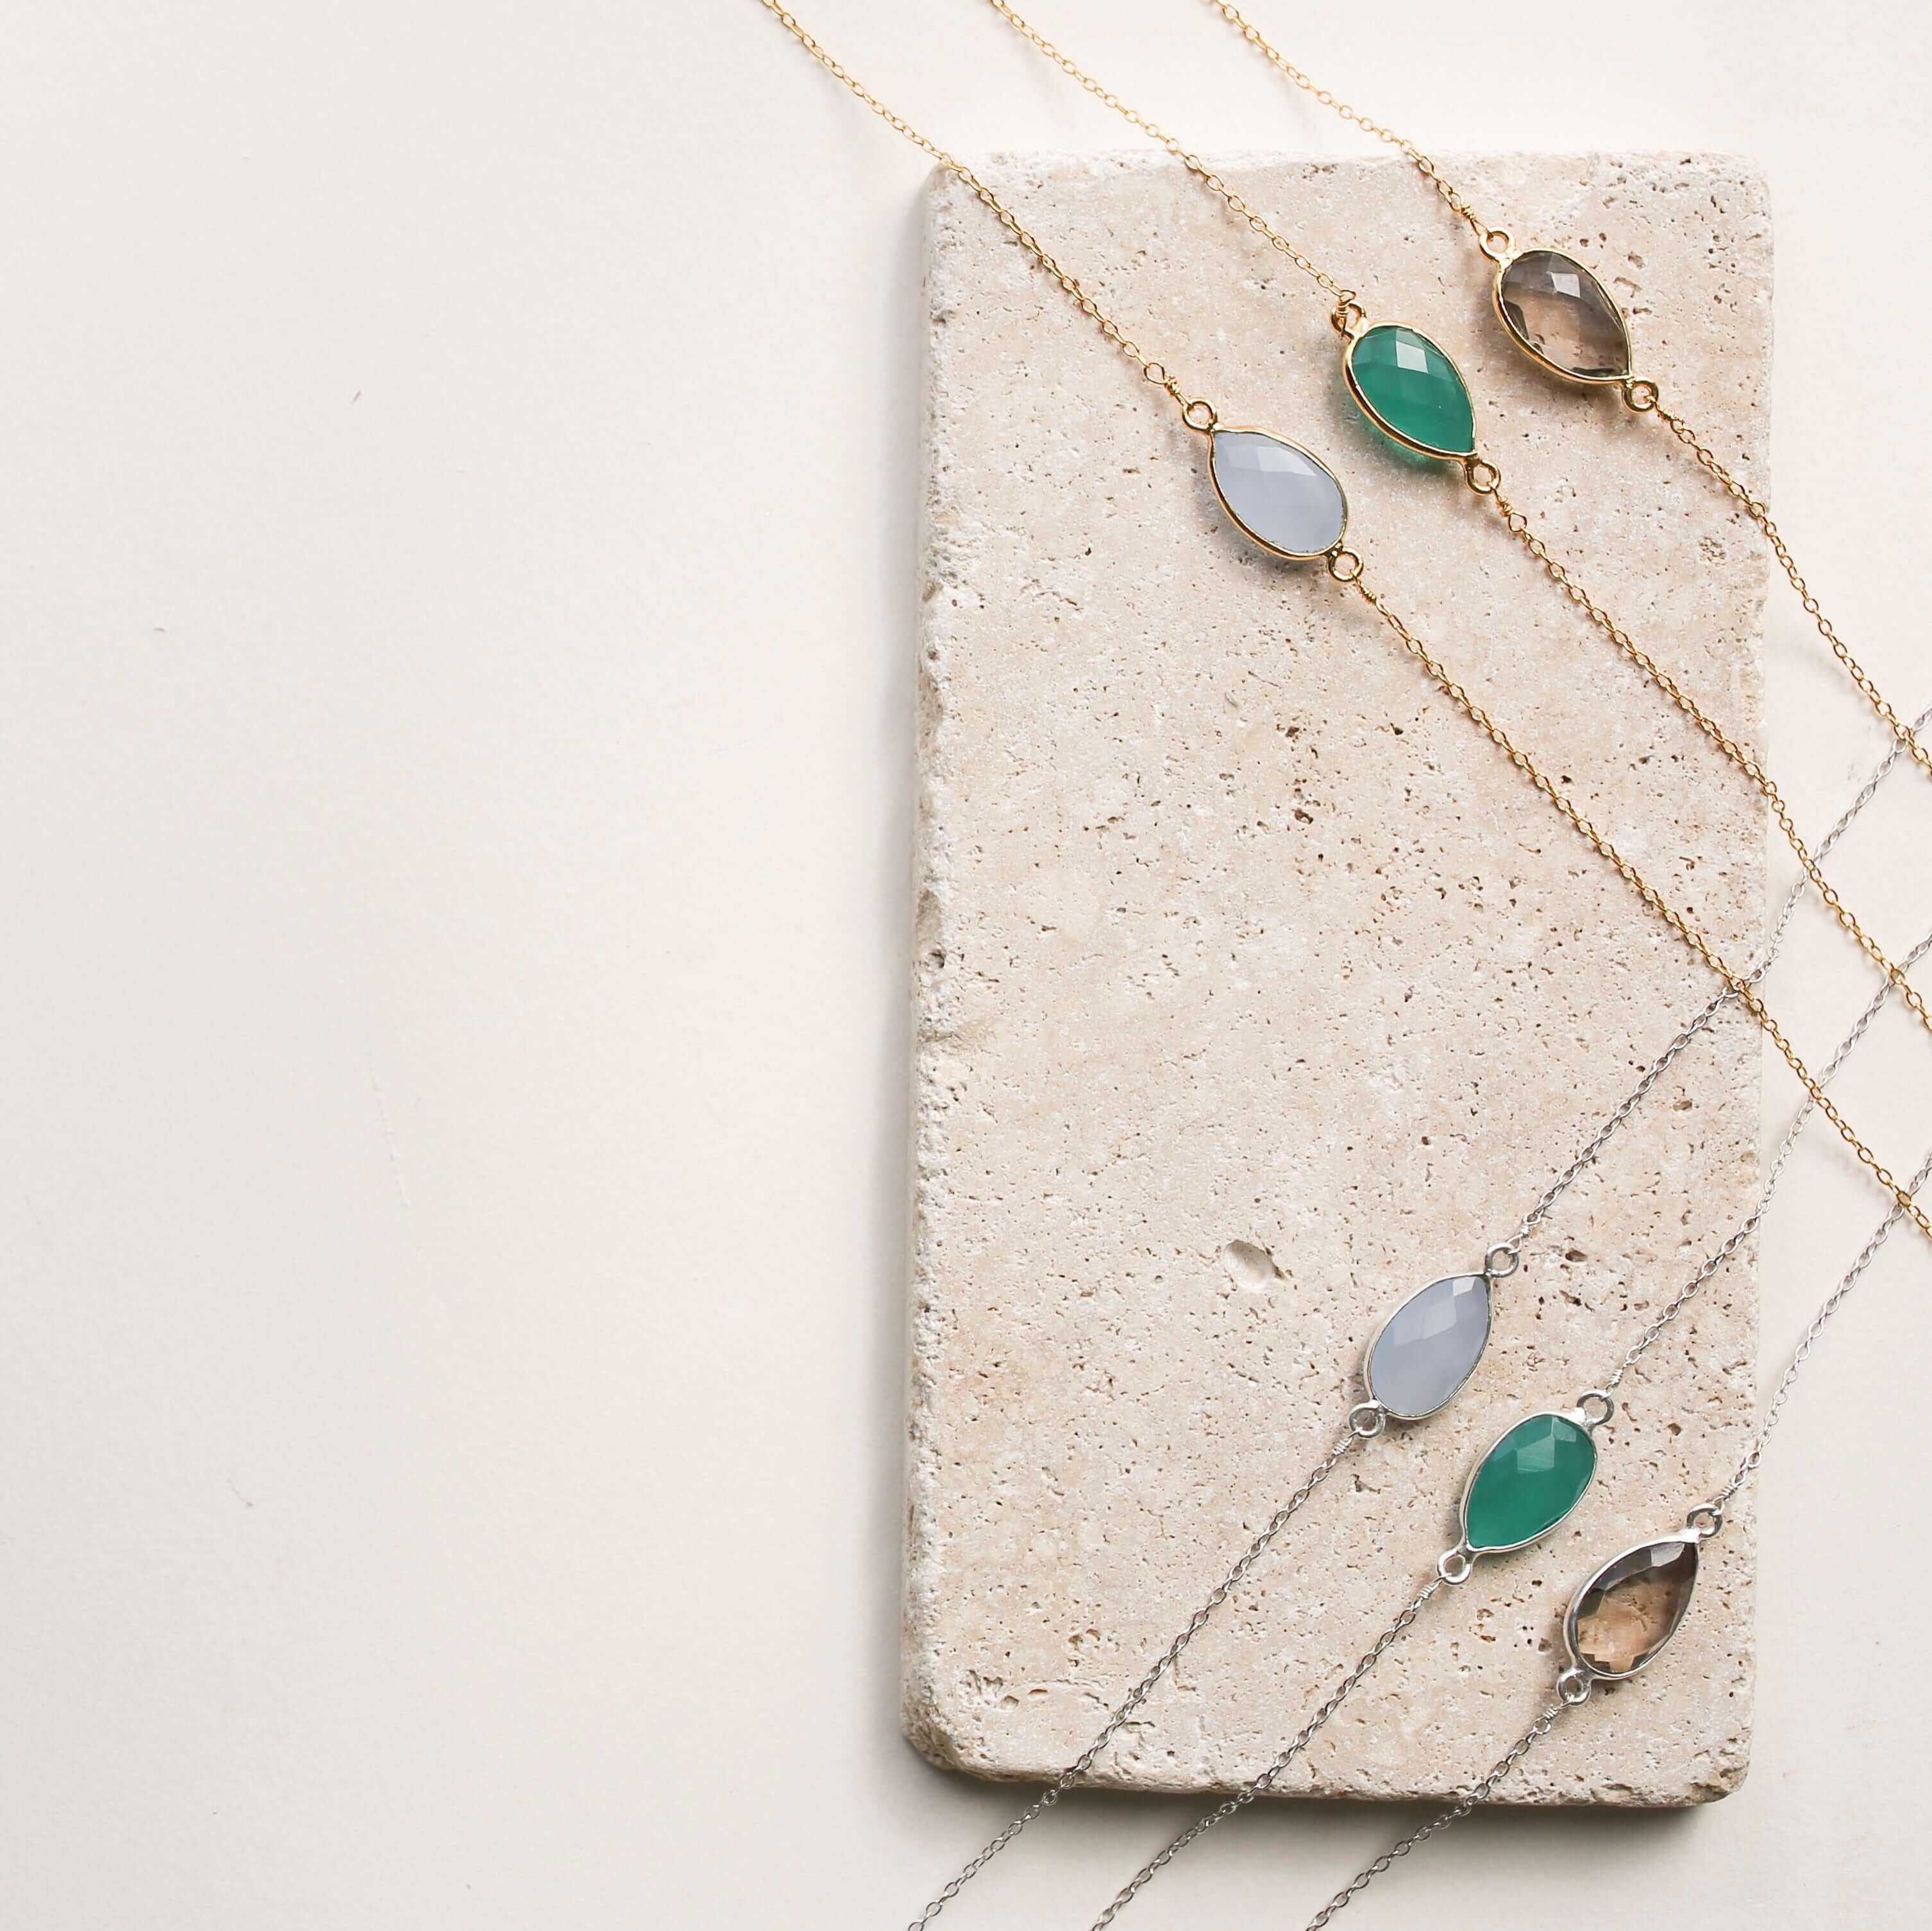 Minimalist Silver Necklace Featuring a Colorful Gem Stone  